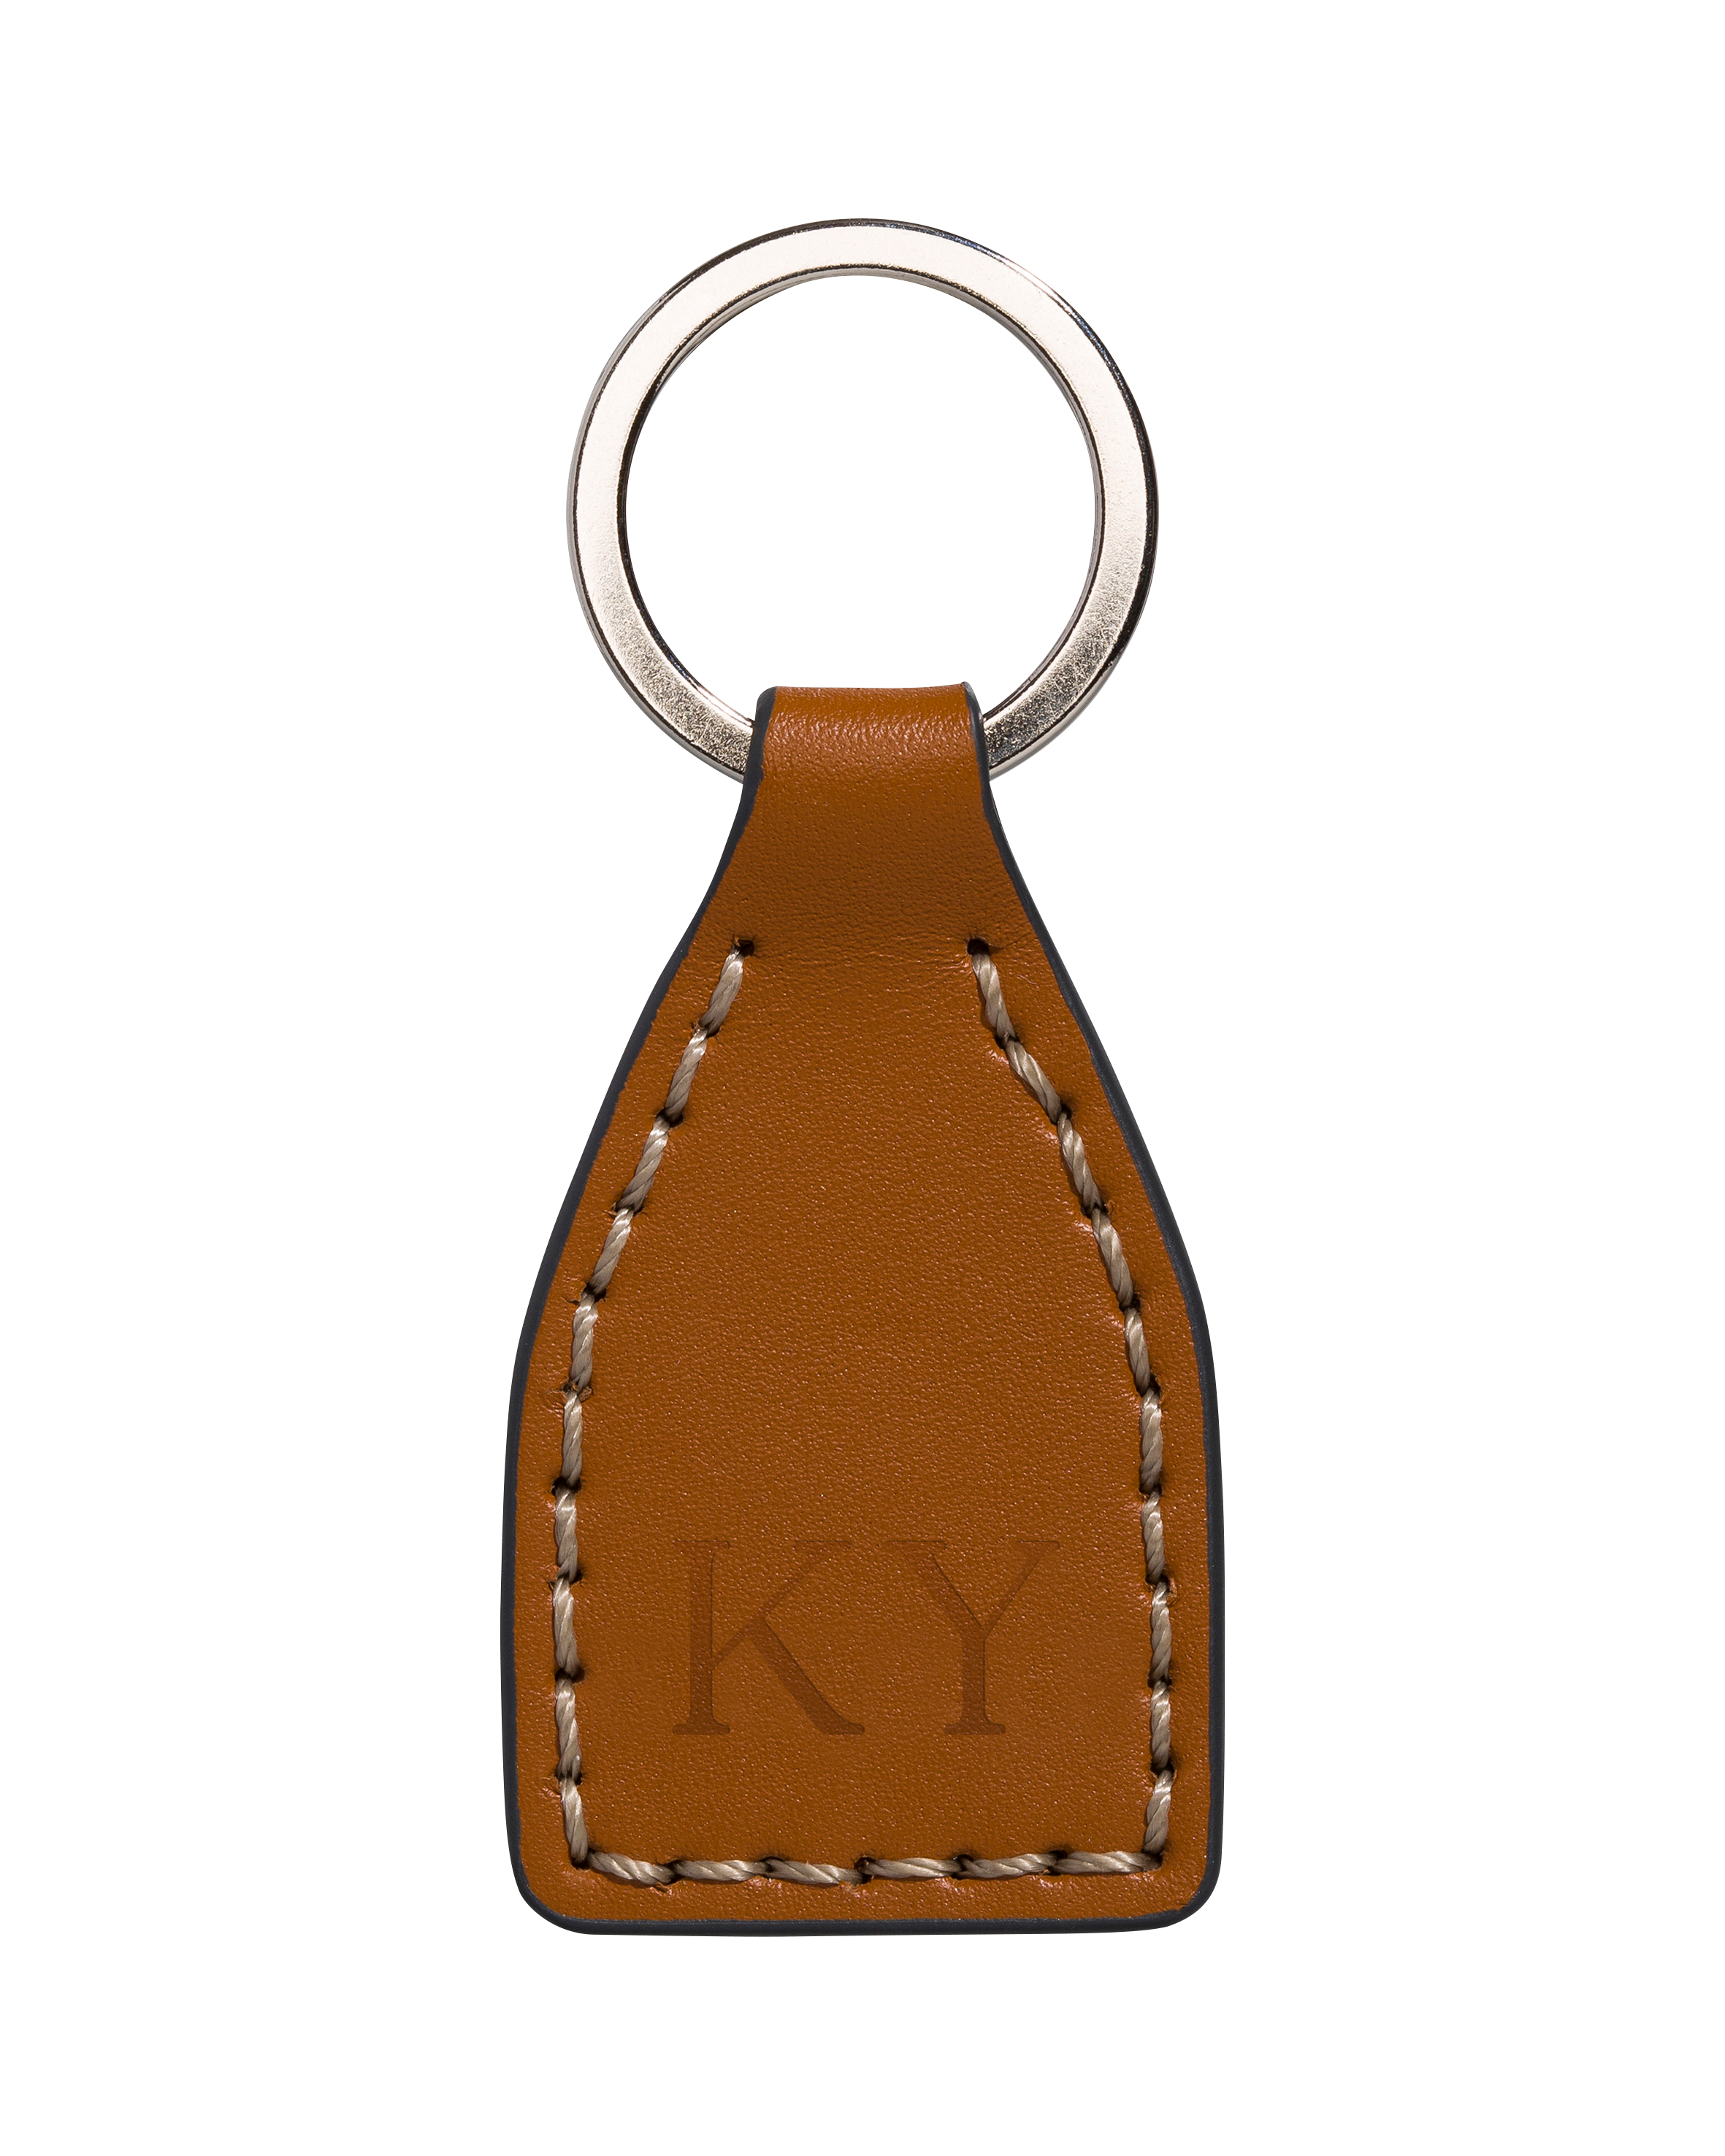 The Keyring in Tan Leather by The Horse